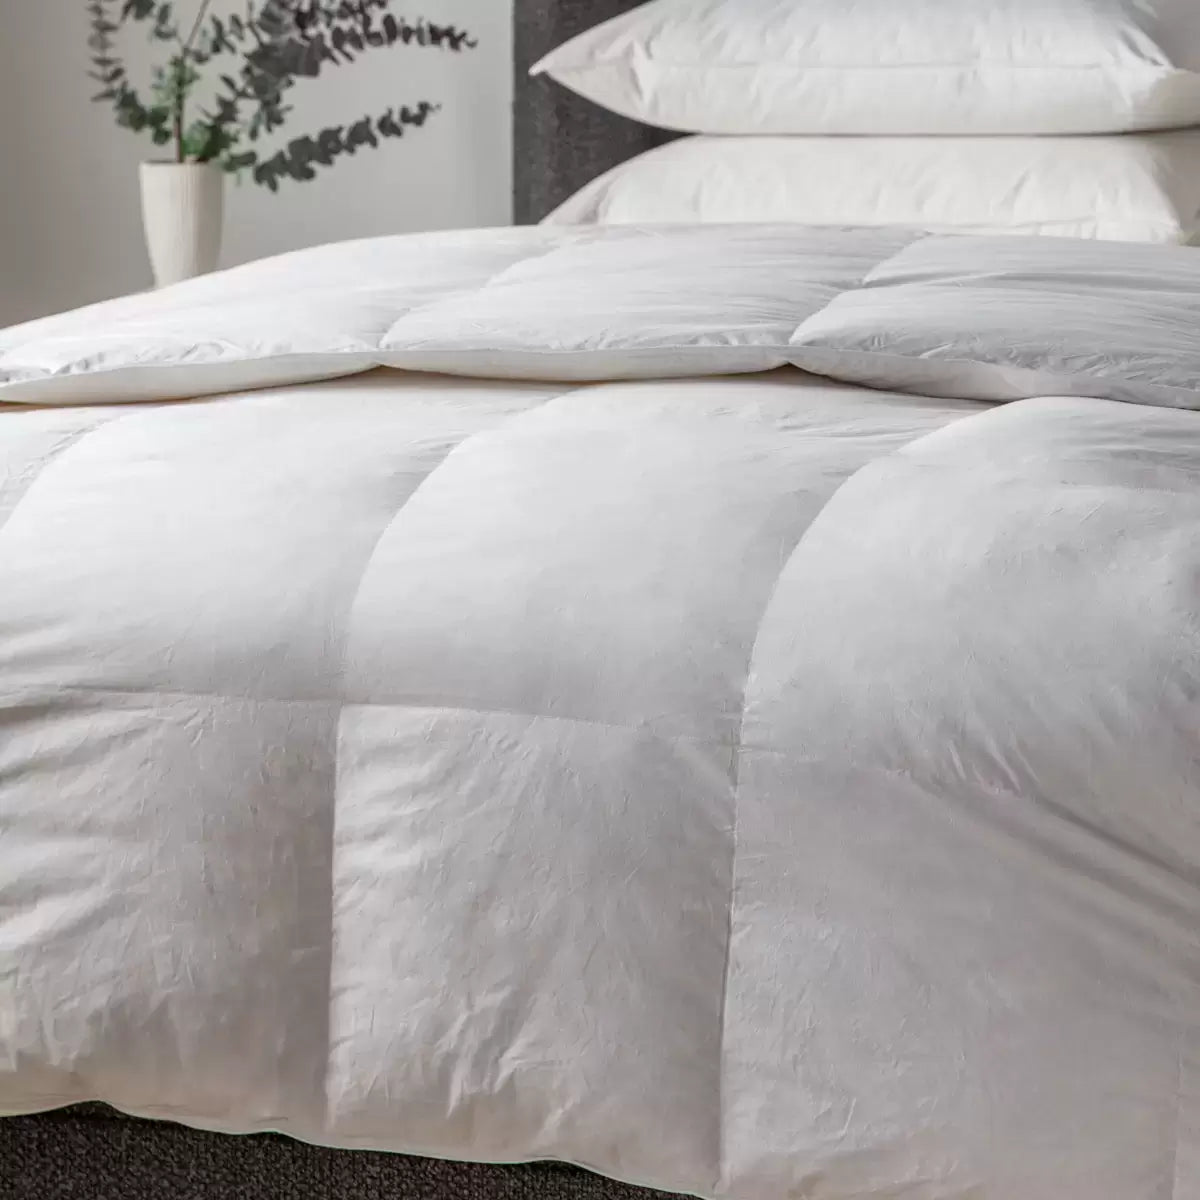 Simply Sleep White Goose Feather and Down 10.5 Tog Duvet